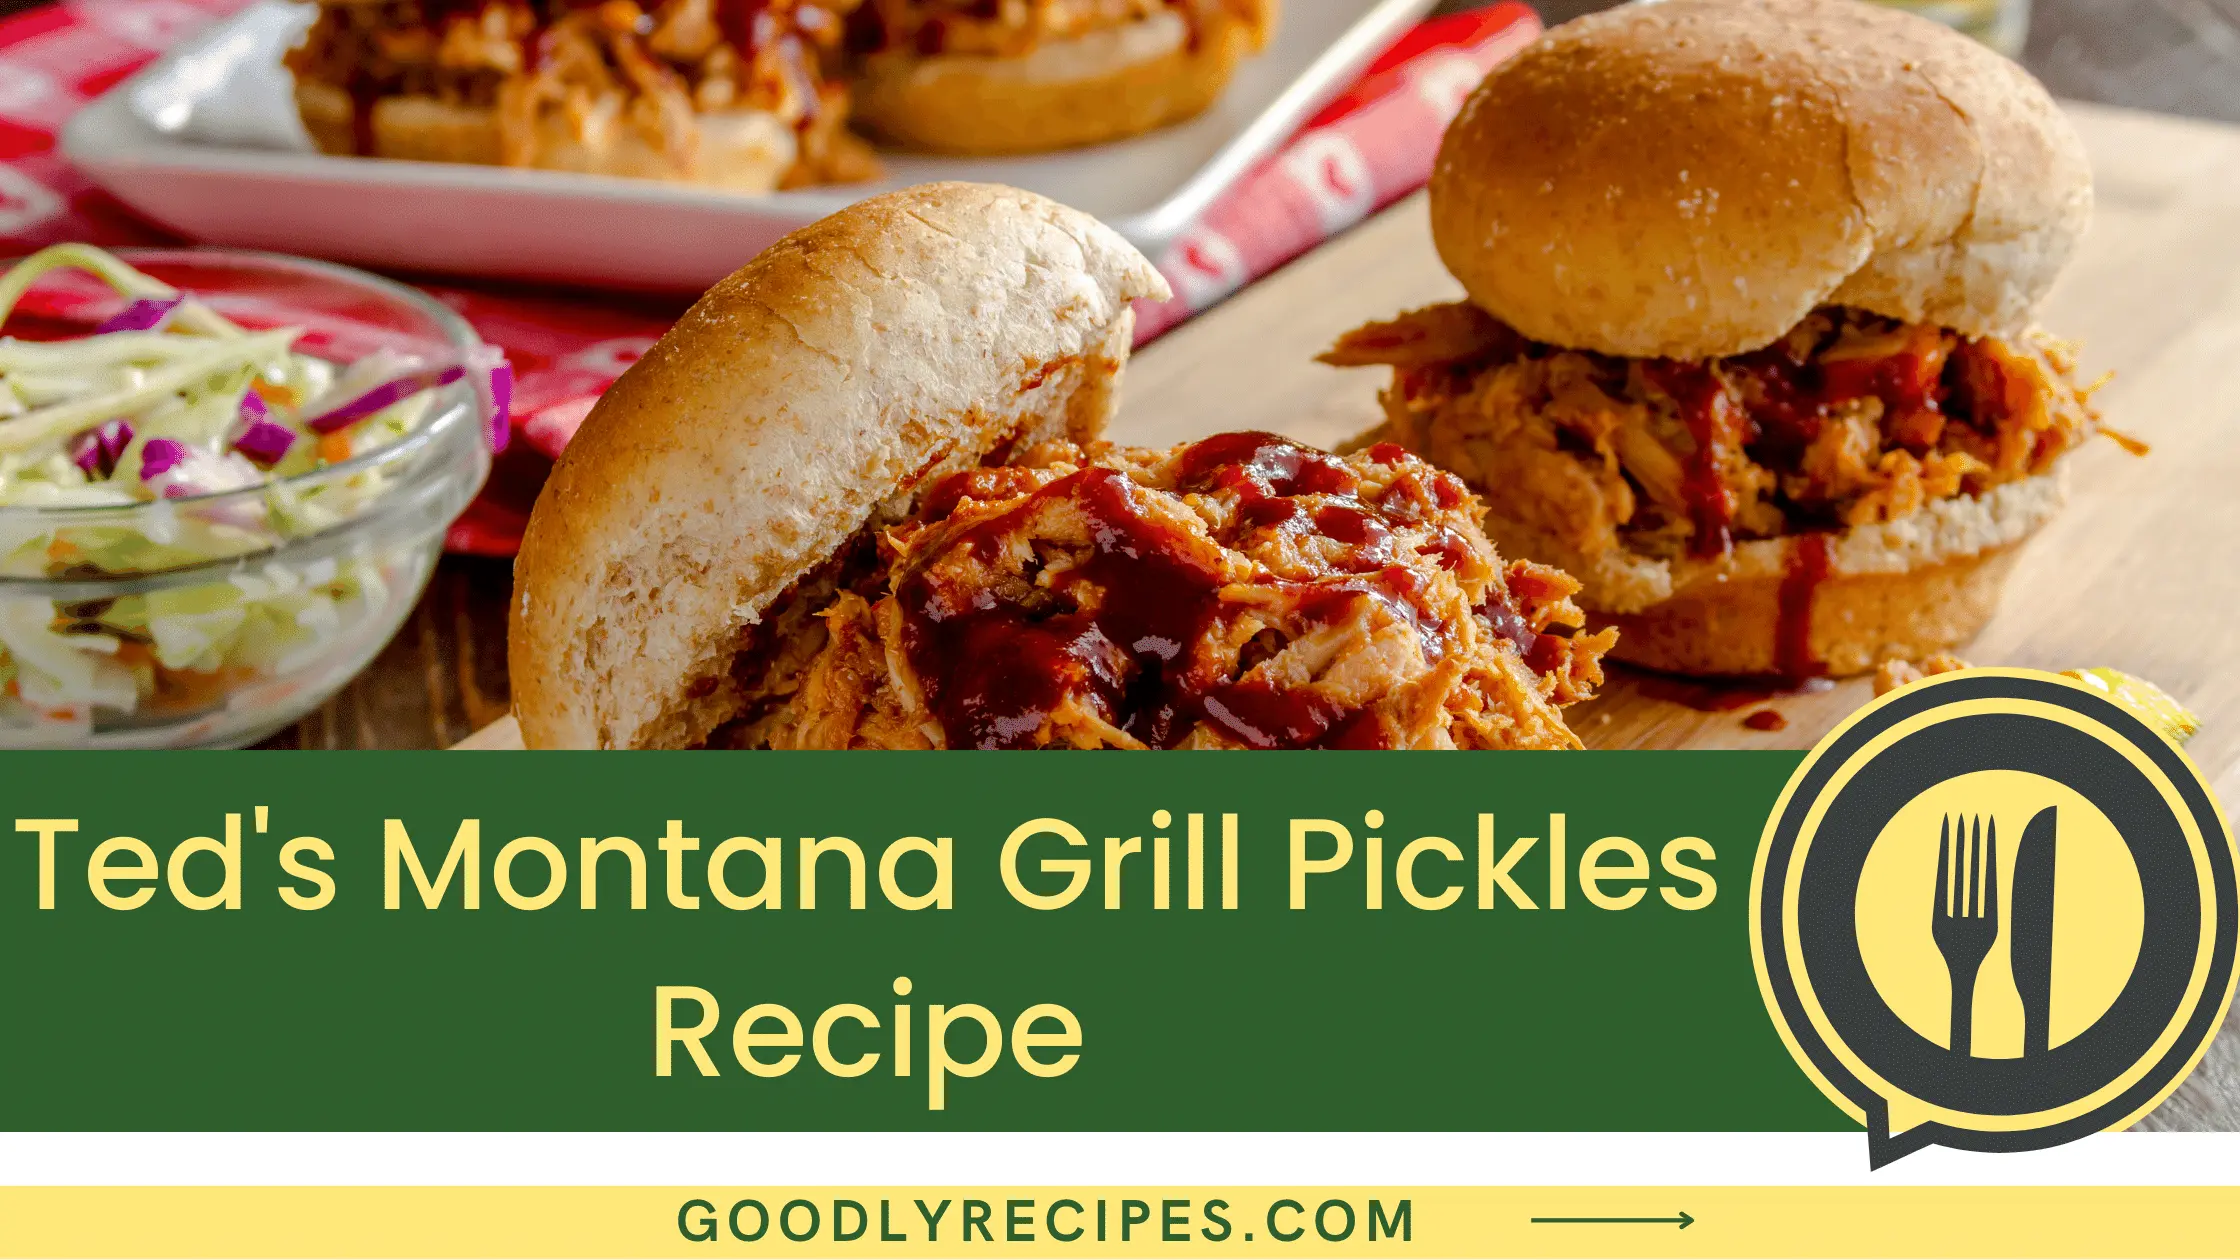 What is Ted’s Montana Grill Pickles Recipe?